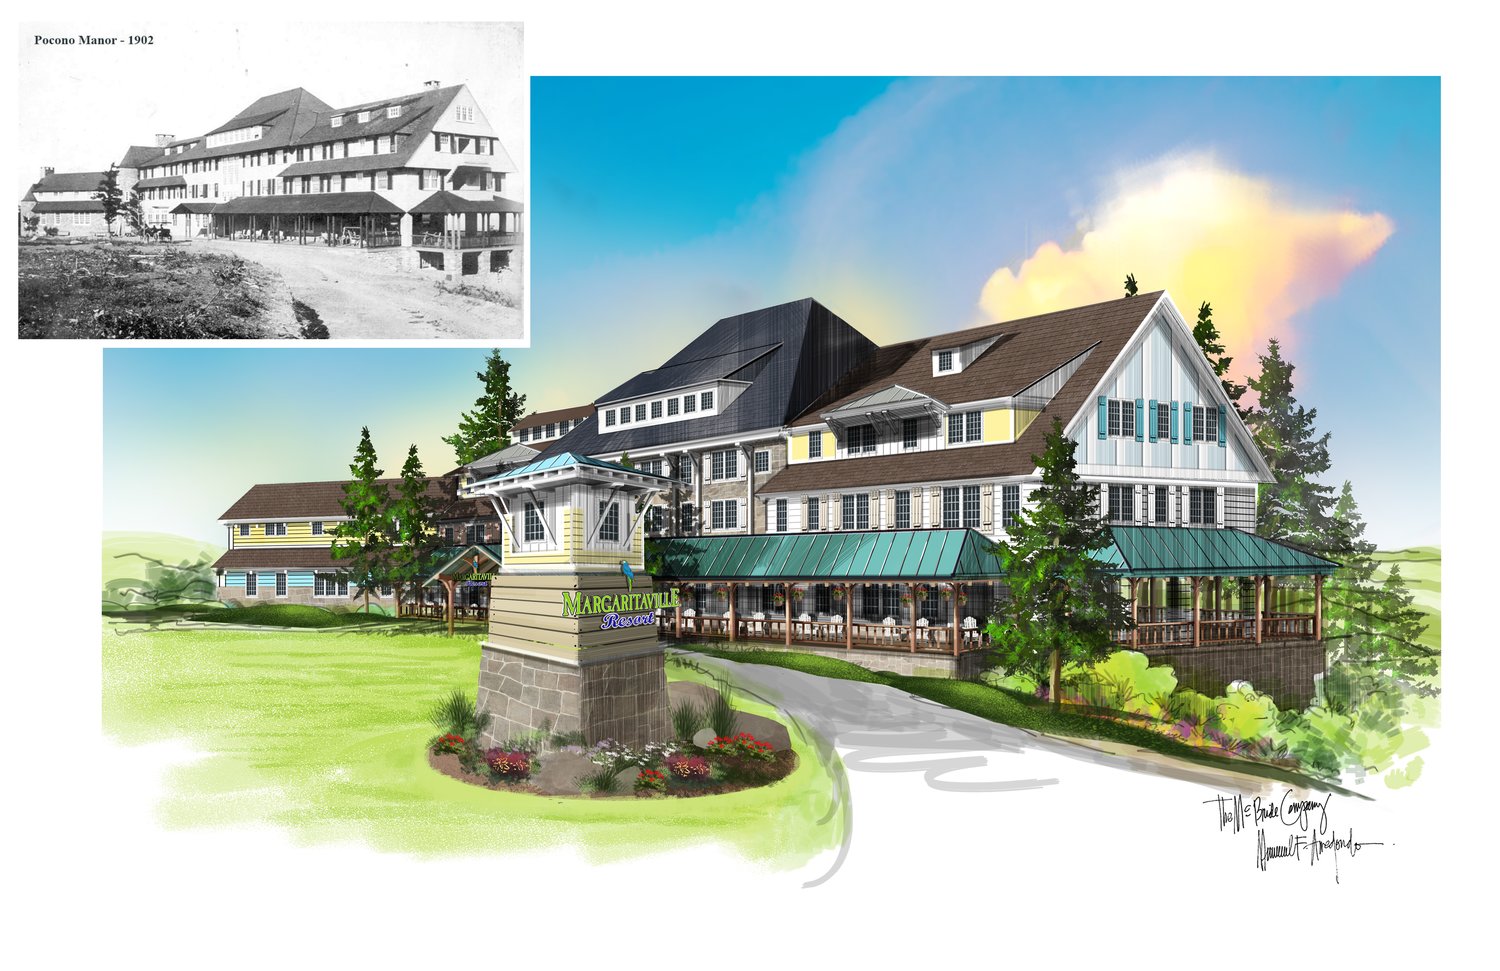 The Margaritaville Hotel Pocono Mountains  will pay homage to the original Pocono Manor (inset).. Built in 1902, it was accepted into the National Registry of Historic Places in 1997 and burned down in 2019, just weeks before a planned renovation.